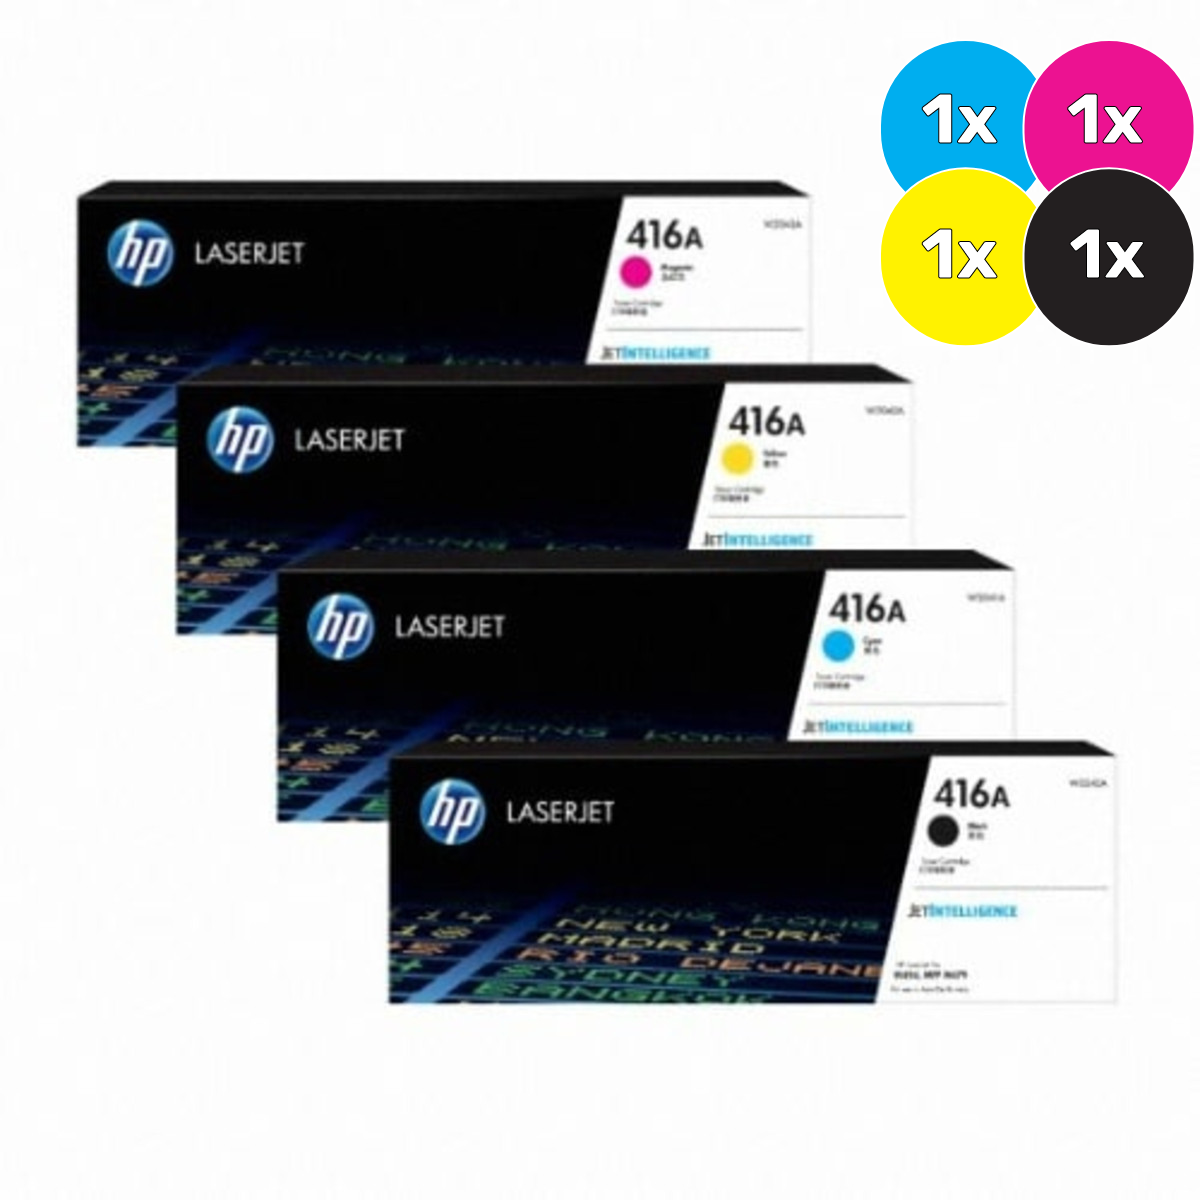 HP 416A Toner Cartridges Value Pack  - Includes: [1 x Black, Cyan, Magenta, Yellow]